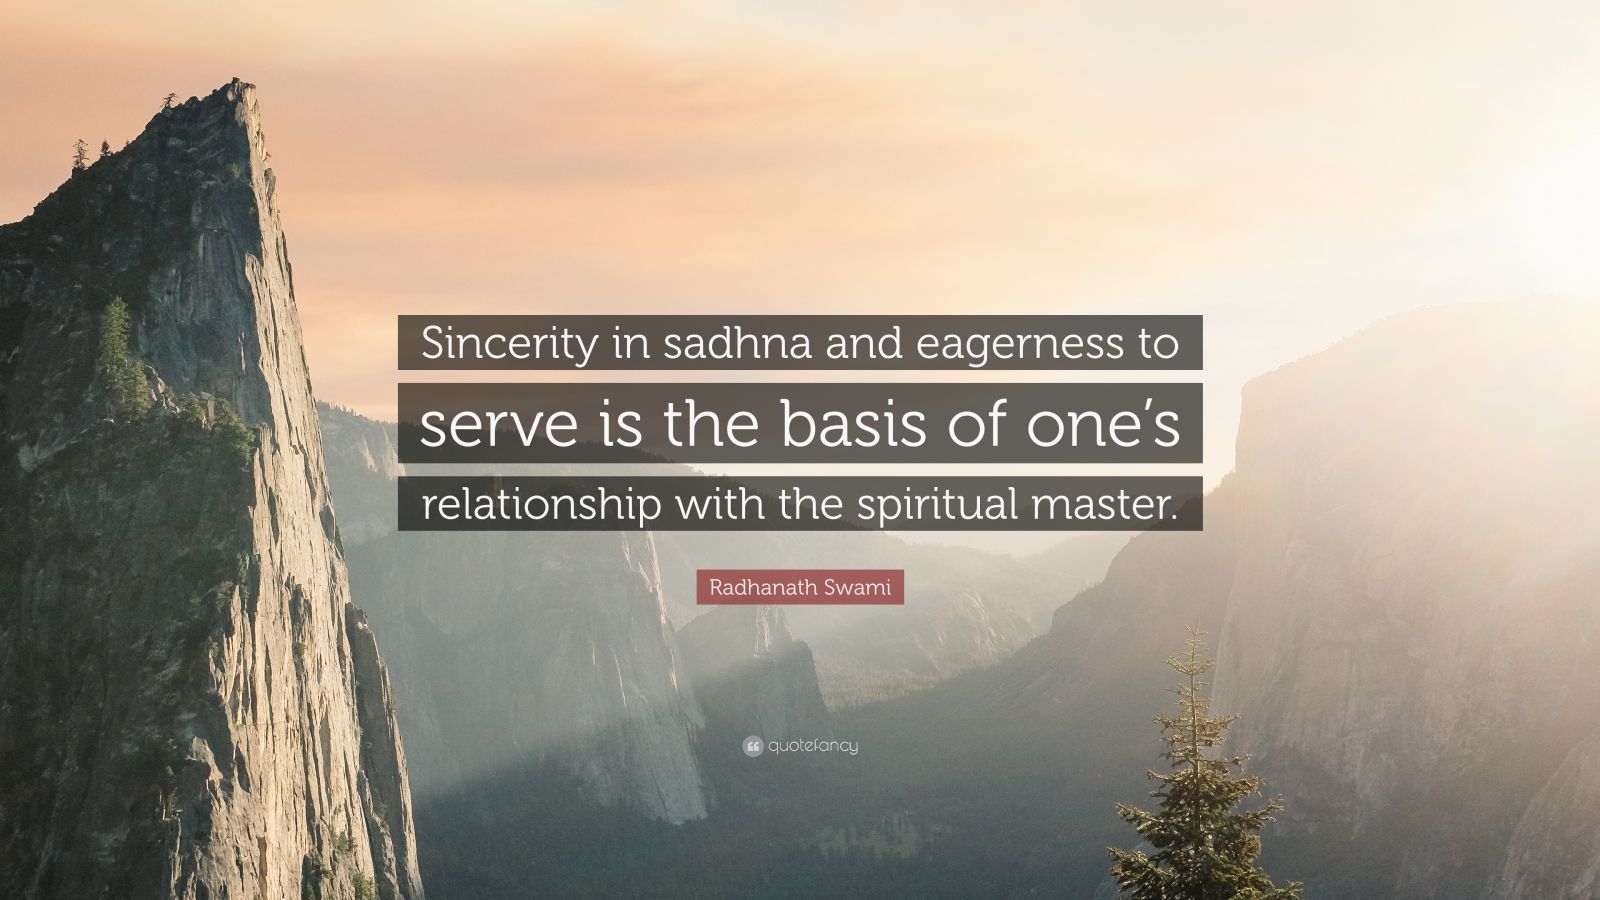 Radhanath Swami Quote: “Sincerity in sadhna and eagerness to serve is